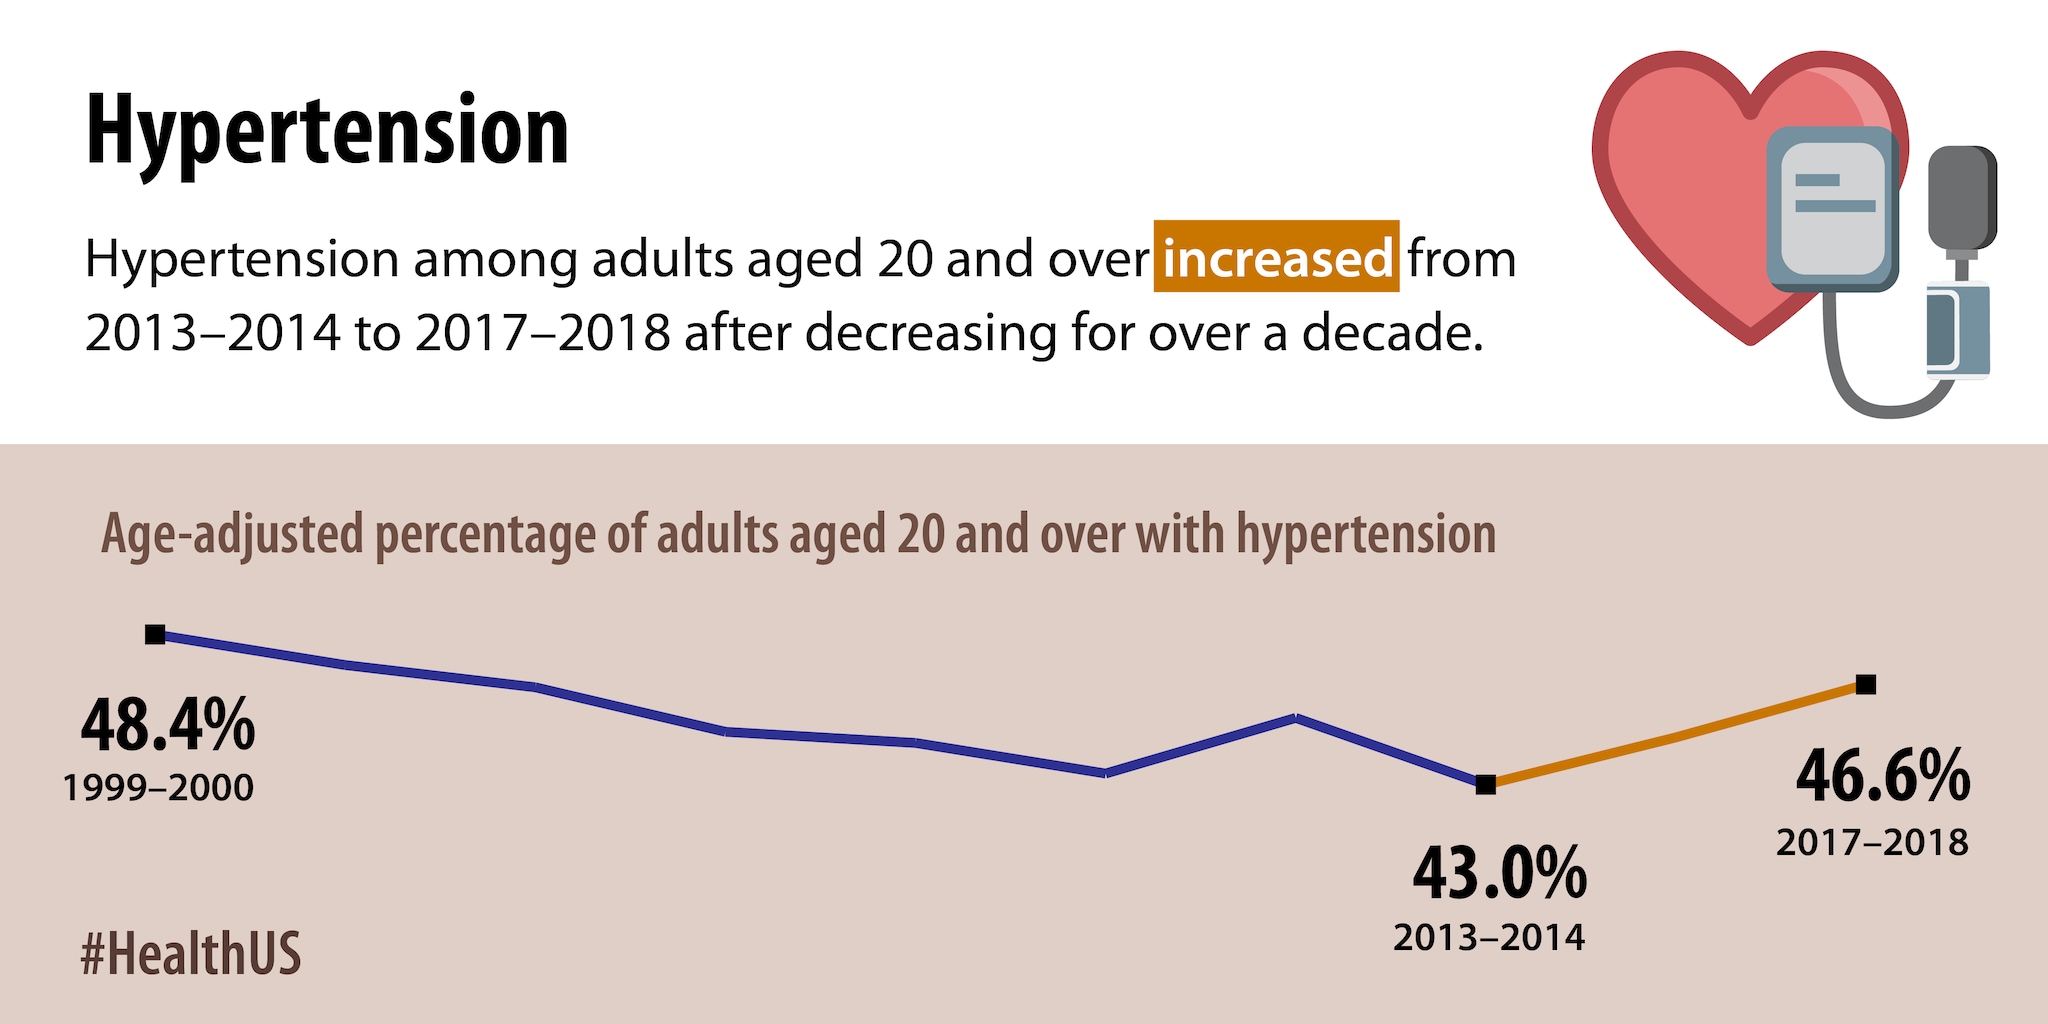 Hypertension among adults aged 20 and over increased from 2013-2014 to 2017-2018 after decreasing for over a decade.